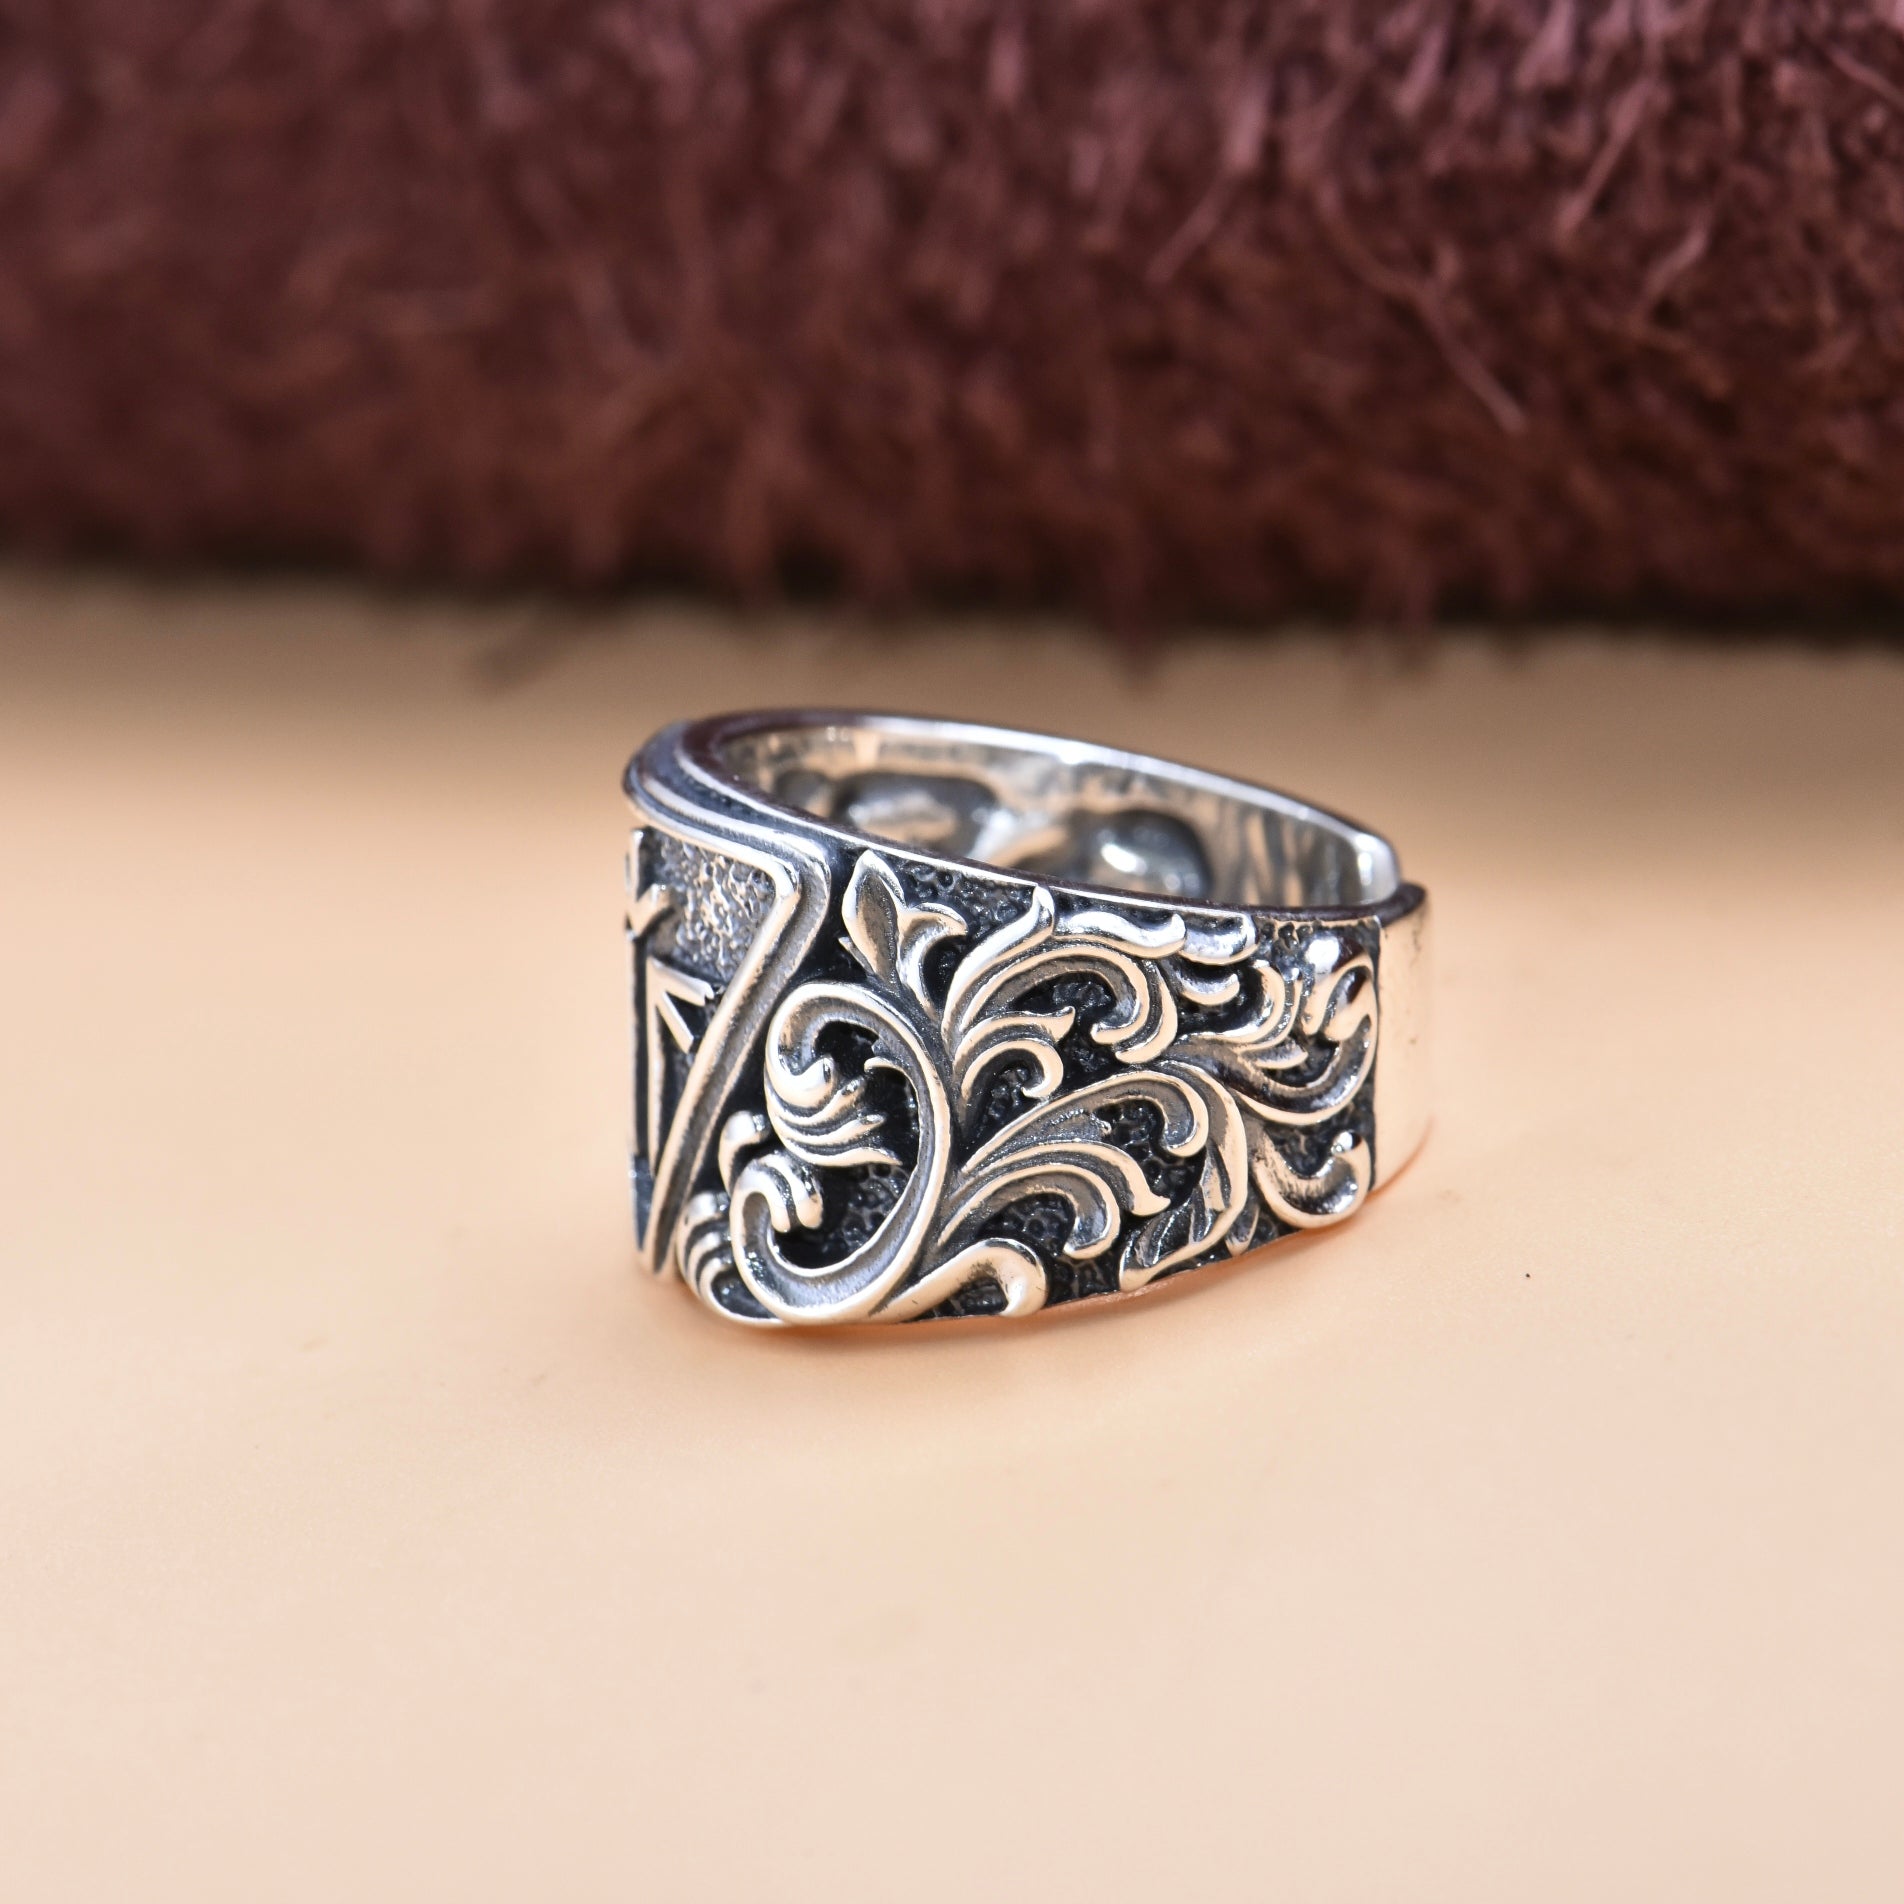 Intricately designed silver ring with a geometric emblem and ornamental accents.